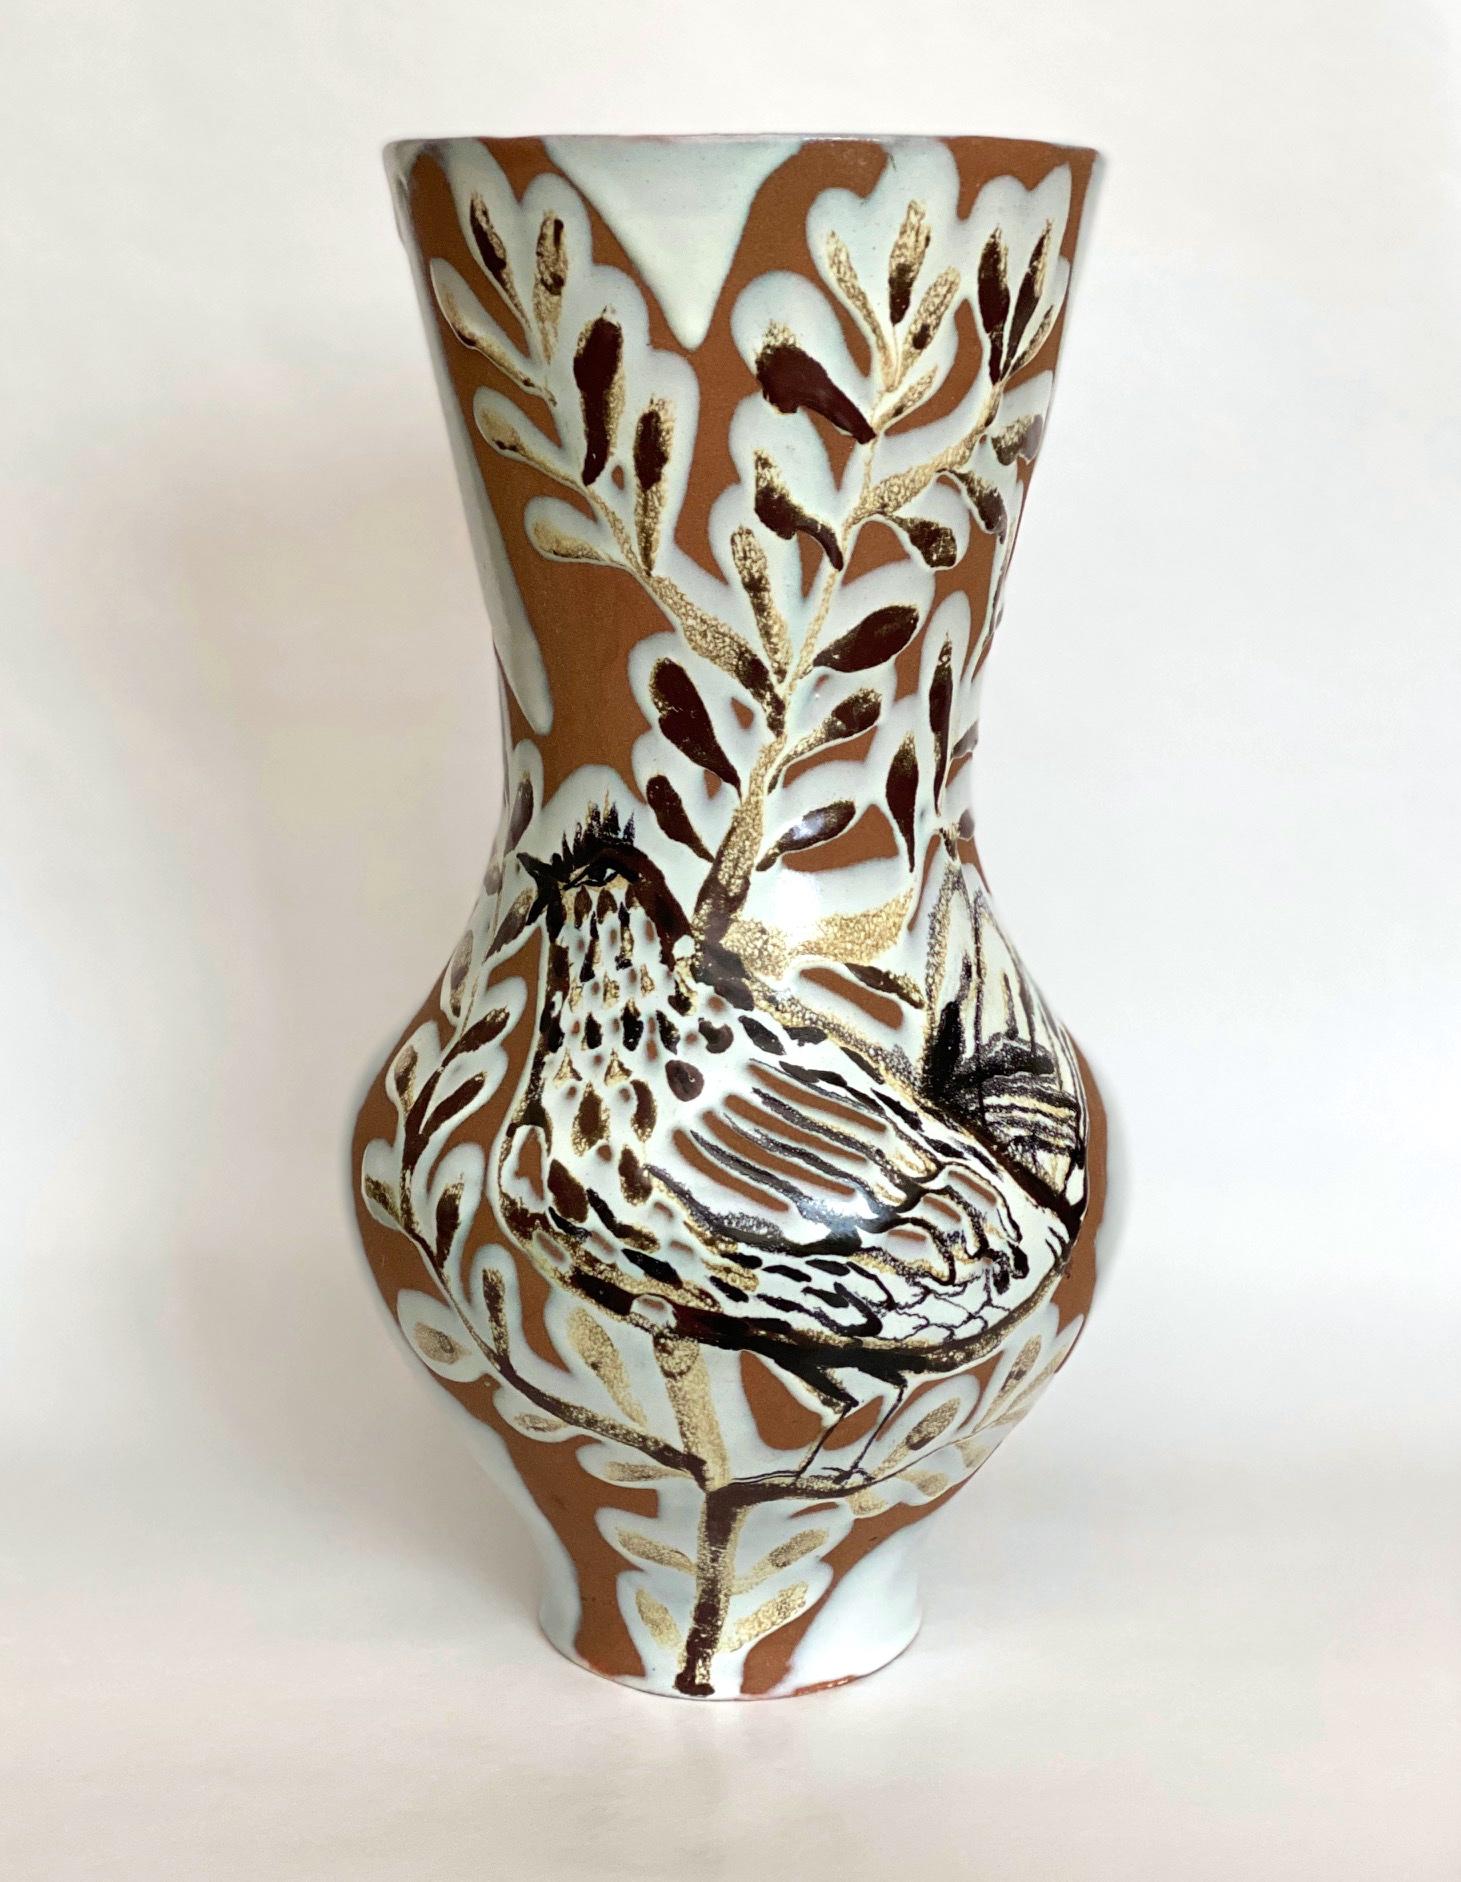 Roger Capron (1922-2006)
Stylized vase with bird and branches signed Capron Vallauris
Measures: H 40 cm x L 20 cm.